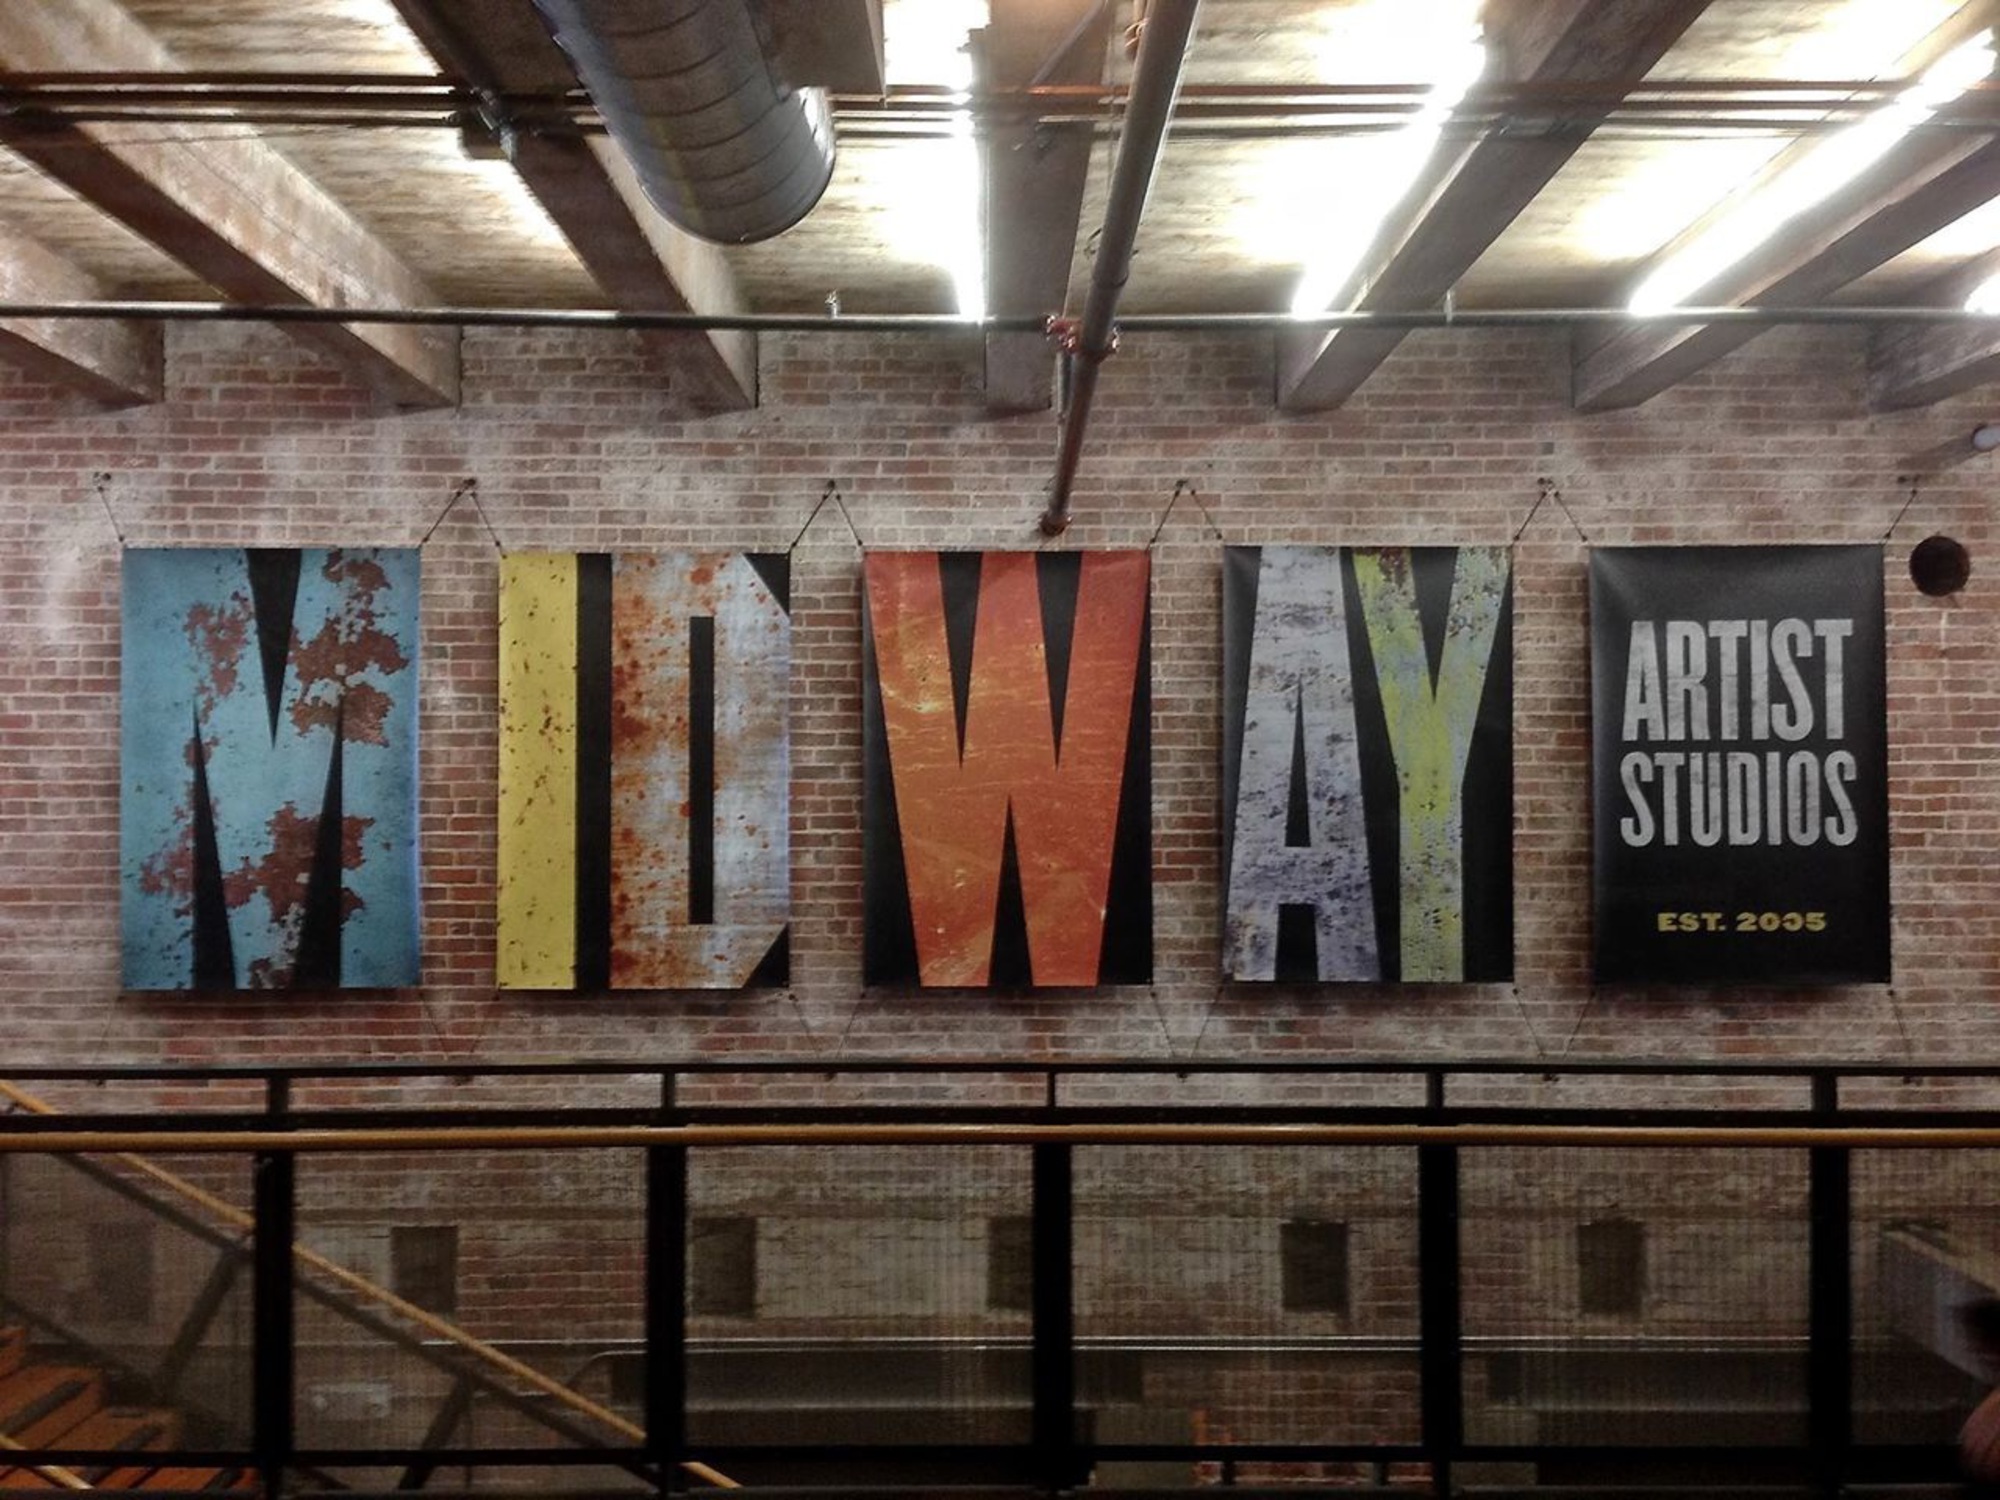 Midway Artist Studios - Lobby banners